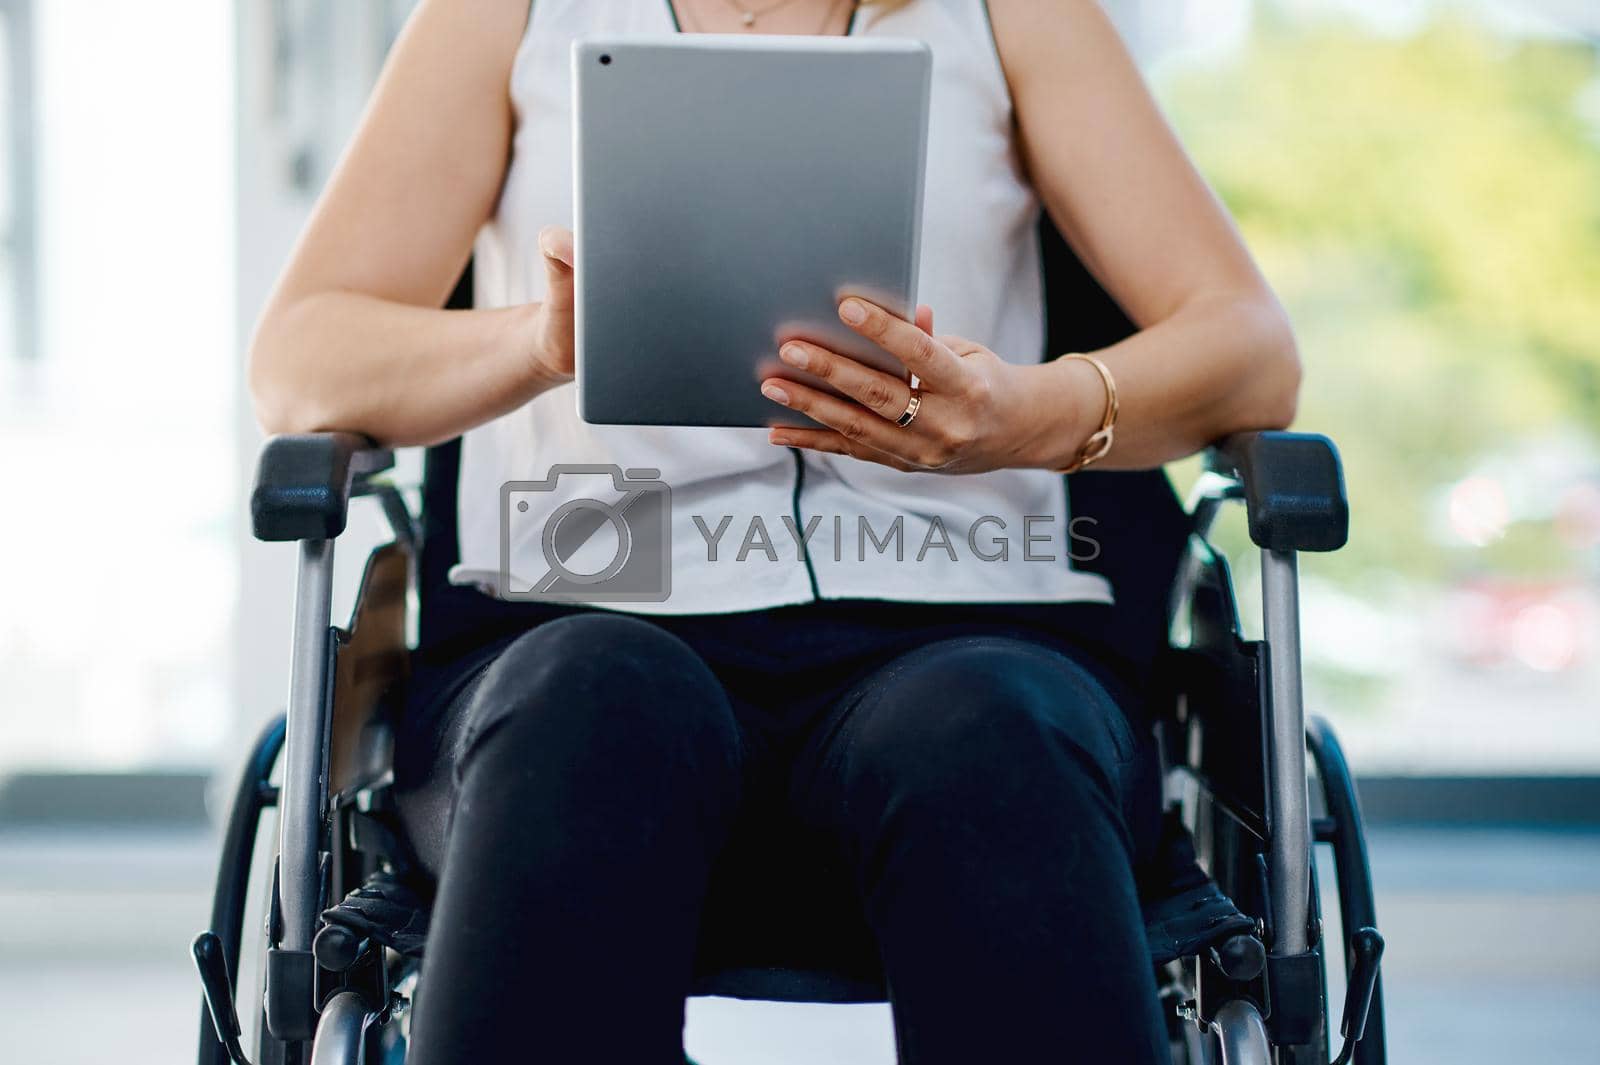 Royalty free image of Online resources makes everyones job a little easier. an unrecognizable businesswoman using a digital tablet in the office. by YuriArcurs